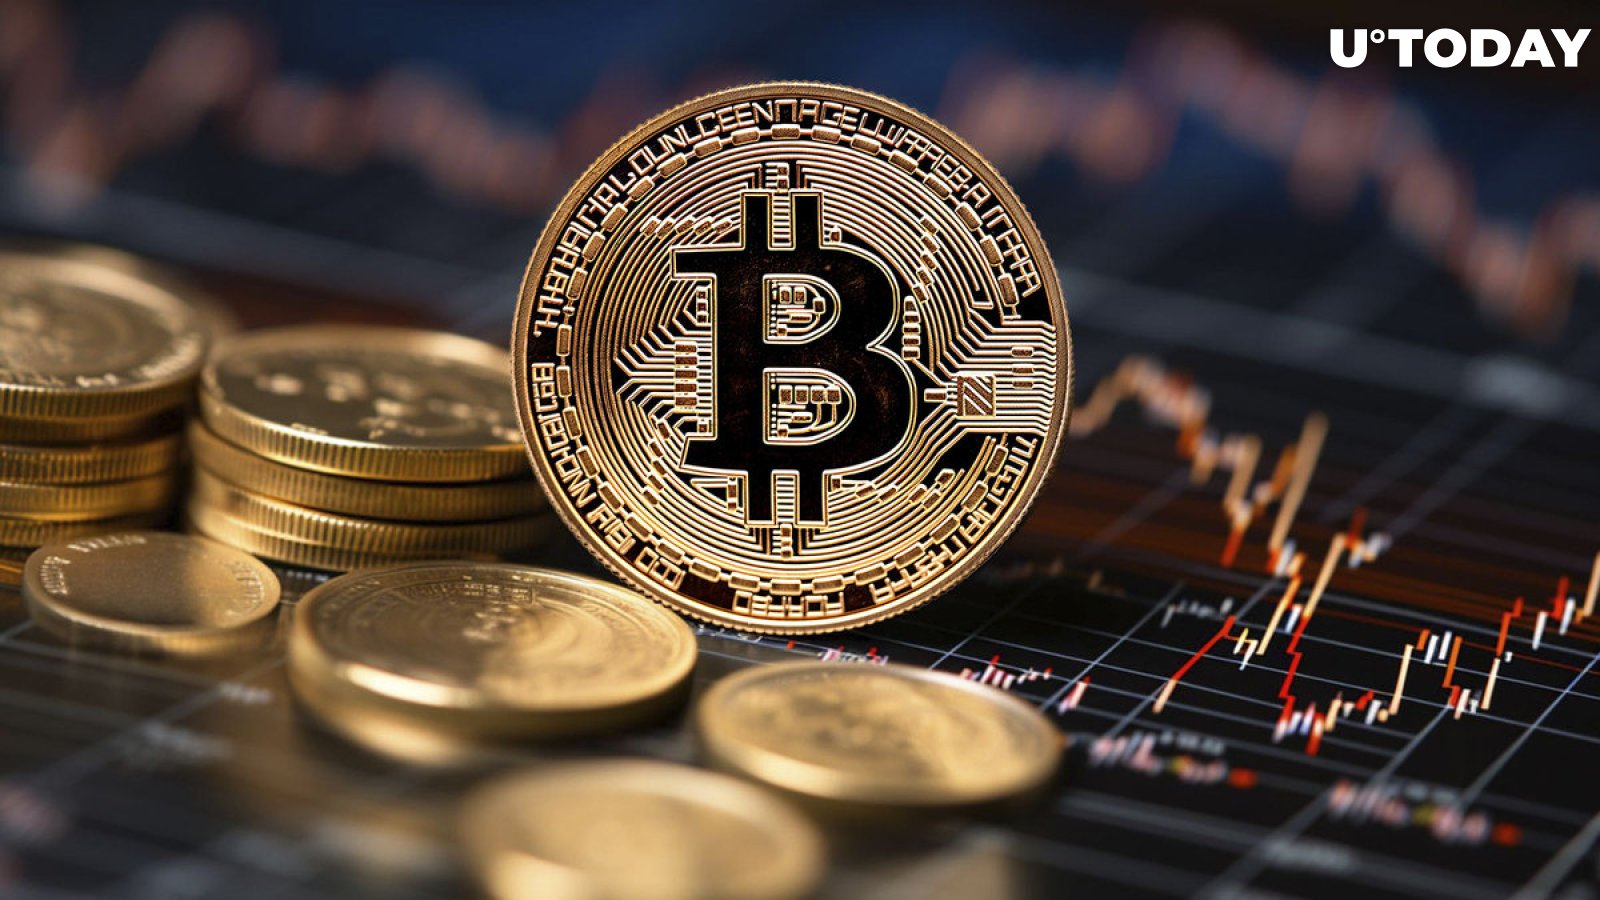 Bitcoin (BTC) Could Be on the Verge of a Reversal, This Indicator Suggests